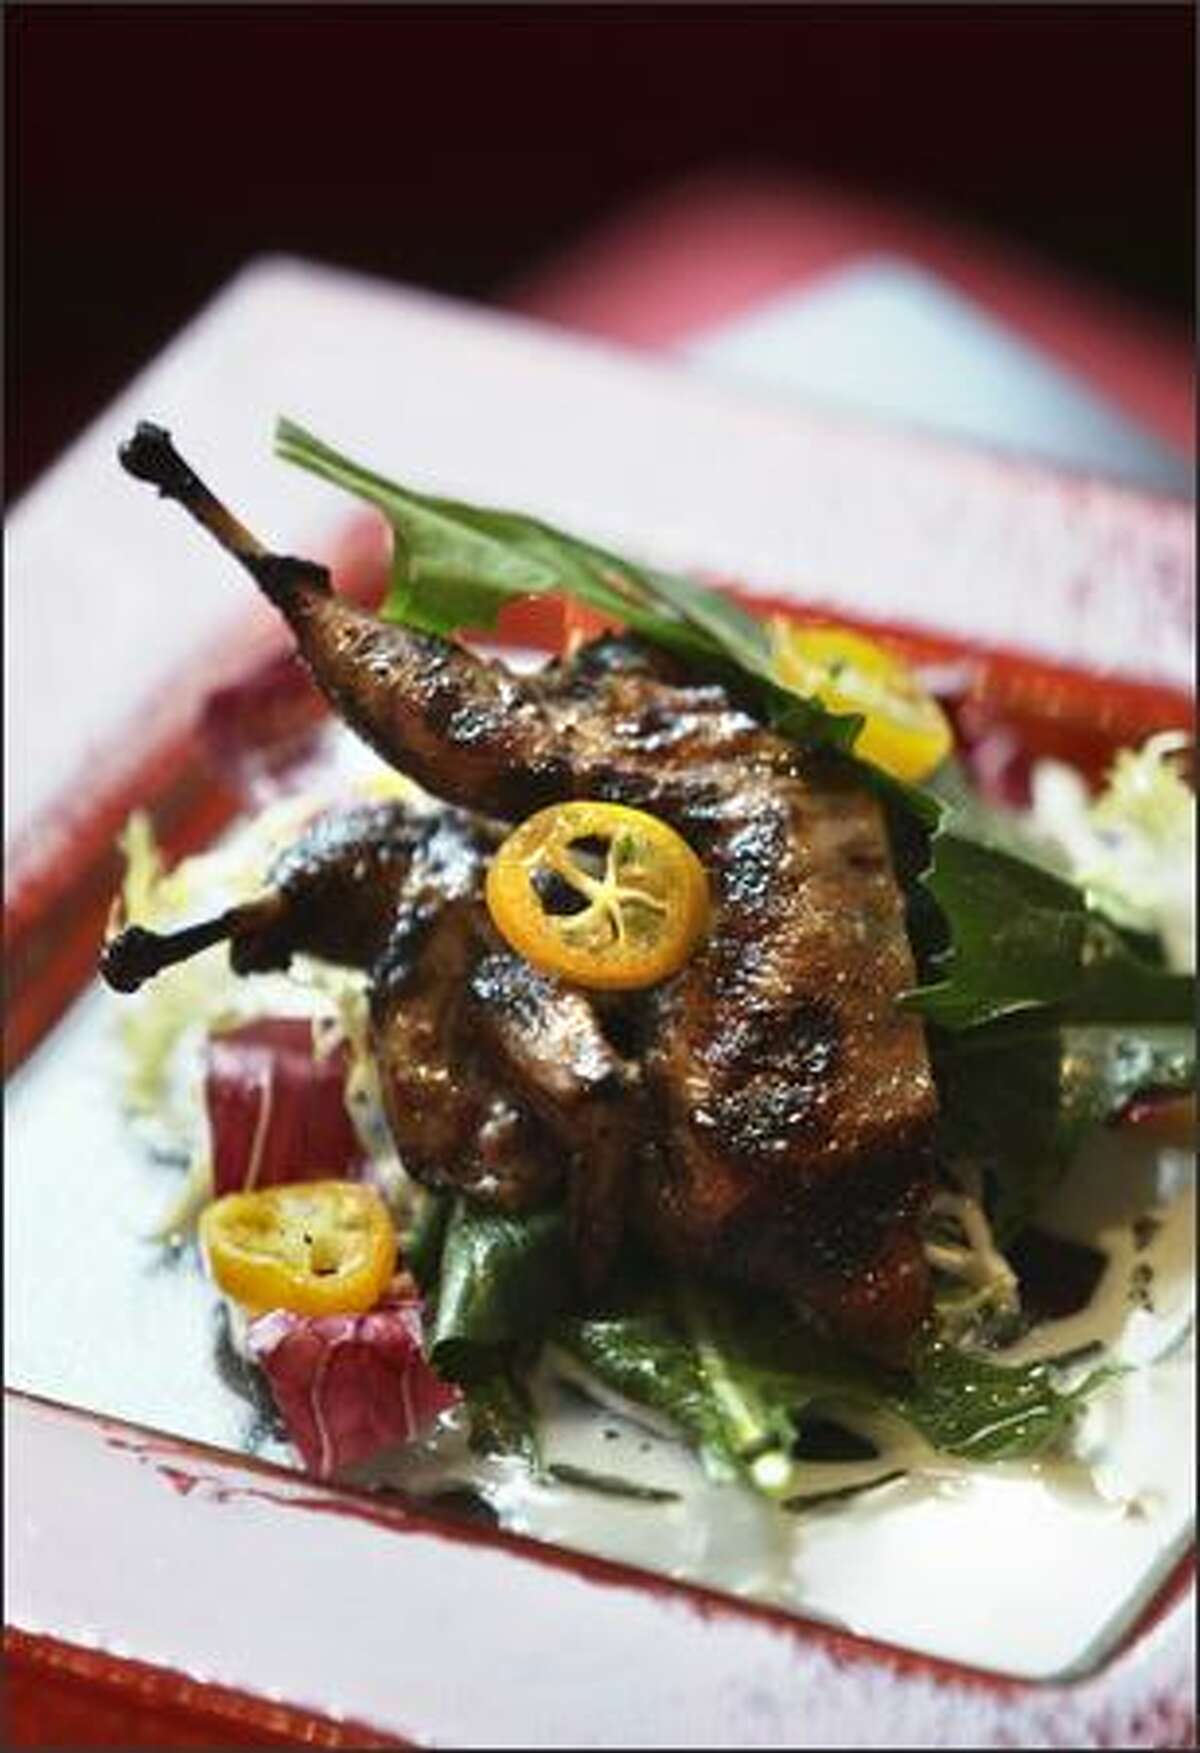 The juicy Oregon quail hits all the right notes with a smoky flavor. Sazerac's attempts to balance the menu with elements of the Northwest and South can be challenging, but when the kitchen gets it right, the results are fantastic.